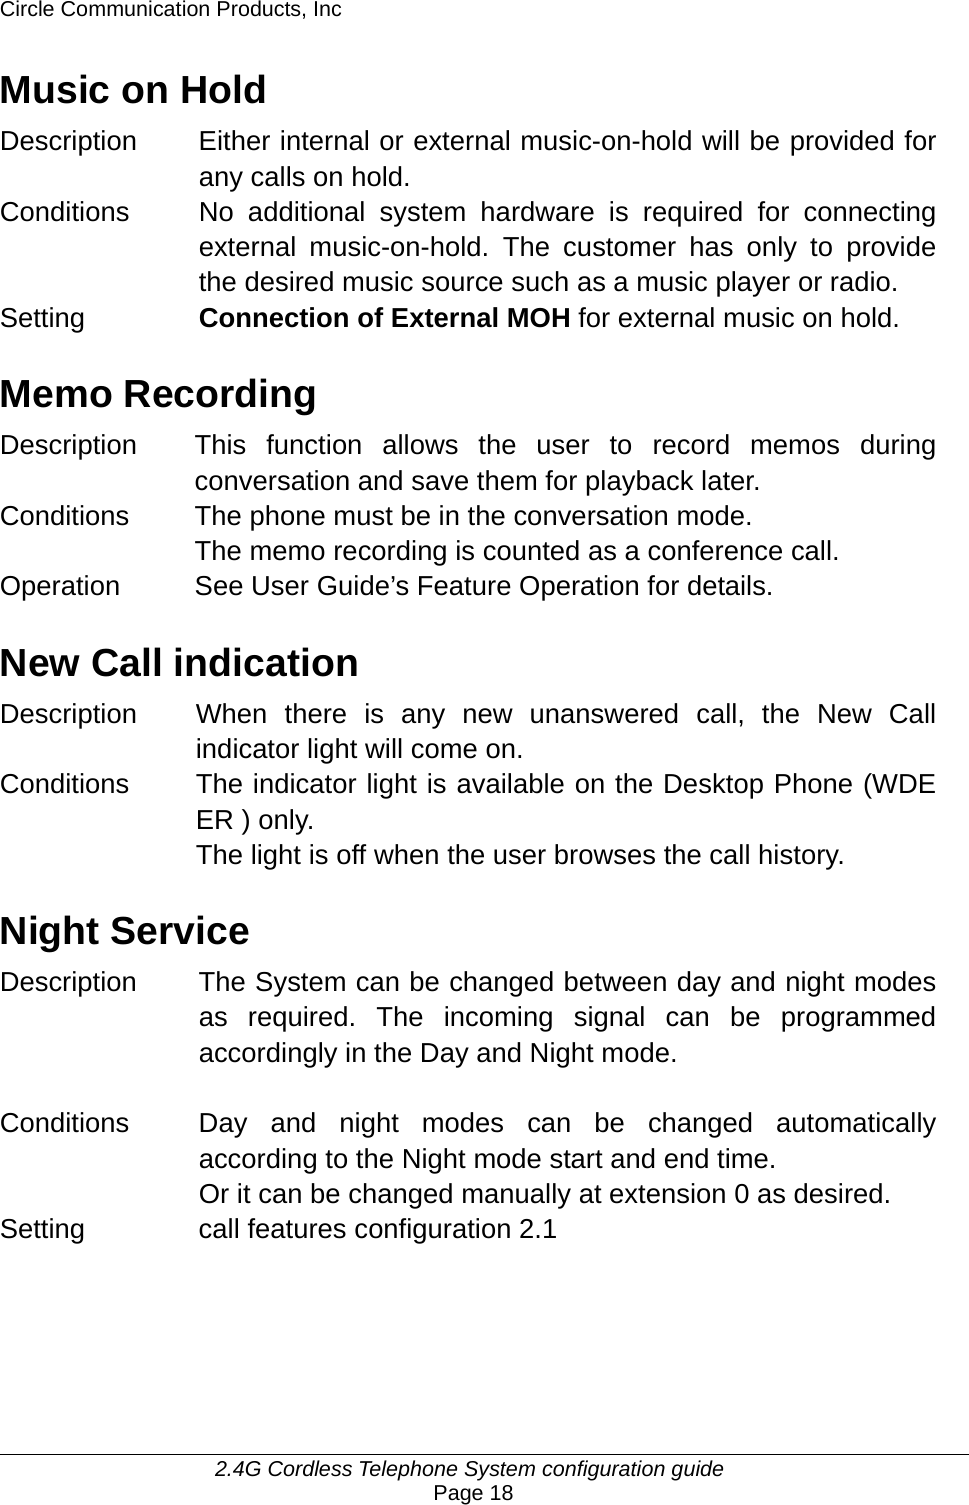 Circle Communication Products, Inc     2.4G Cordless Telephone System configuration guide Page 18 Music on Hold Description Either internal or external music-on-hold will be provided for any calls on hold.   Conditions  No additional system hardware is required for connecting external music-on-hold. The customer has only to provide the desired music source such as a music player or radio. Setting  Connection of External MOH for external music on hold.  Memo Recording Description This function allows the user to record memos during conversation and save them for playback later. Conditions  The phone must be in the conversation mode. The memo recording is counted as a conference call. Operation  See User Guide’s Feature Operation for details.  New Call indication Description When there is any new unanswered call, the New Call indicator light will come on. Conditions  The indicator light is available on the Desktop Phone (WDE ER ) only. The light is off when the user browses the call history.  Night Service Description  The System can be changed between day and night modes as required. The incoming signal can be programmed accordingly in the Day and Night mode.     Conditions  Day and night modes can be changed automatically according to the Night mode start and end time. Or it can be changed manually at extension 0 as desired. Setting    call features configuration 2.1    